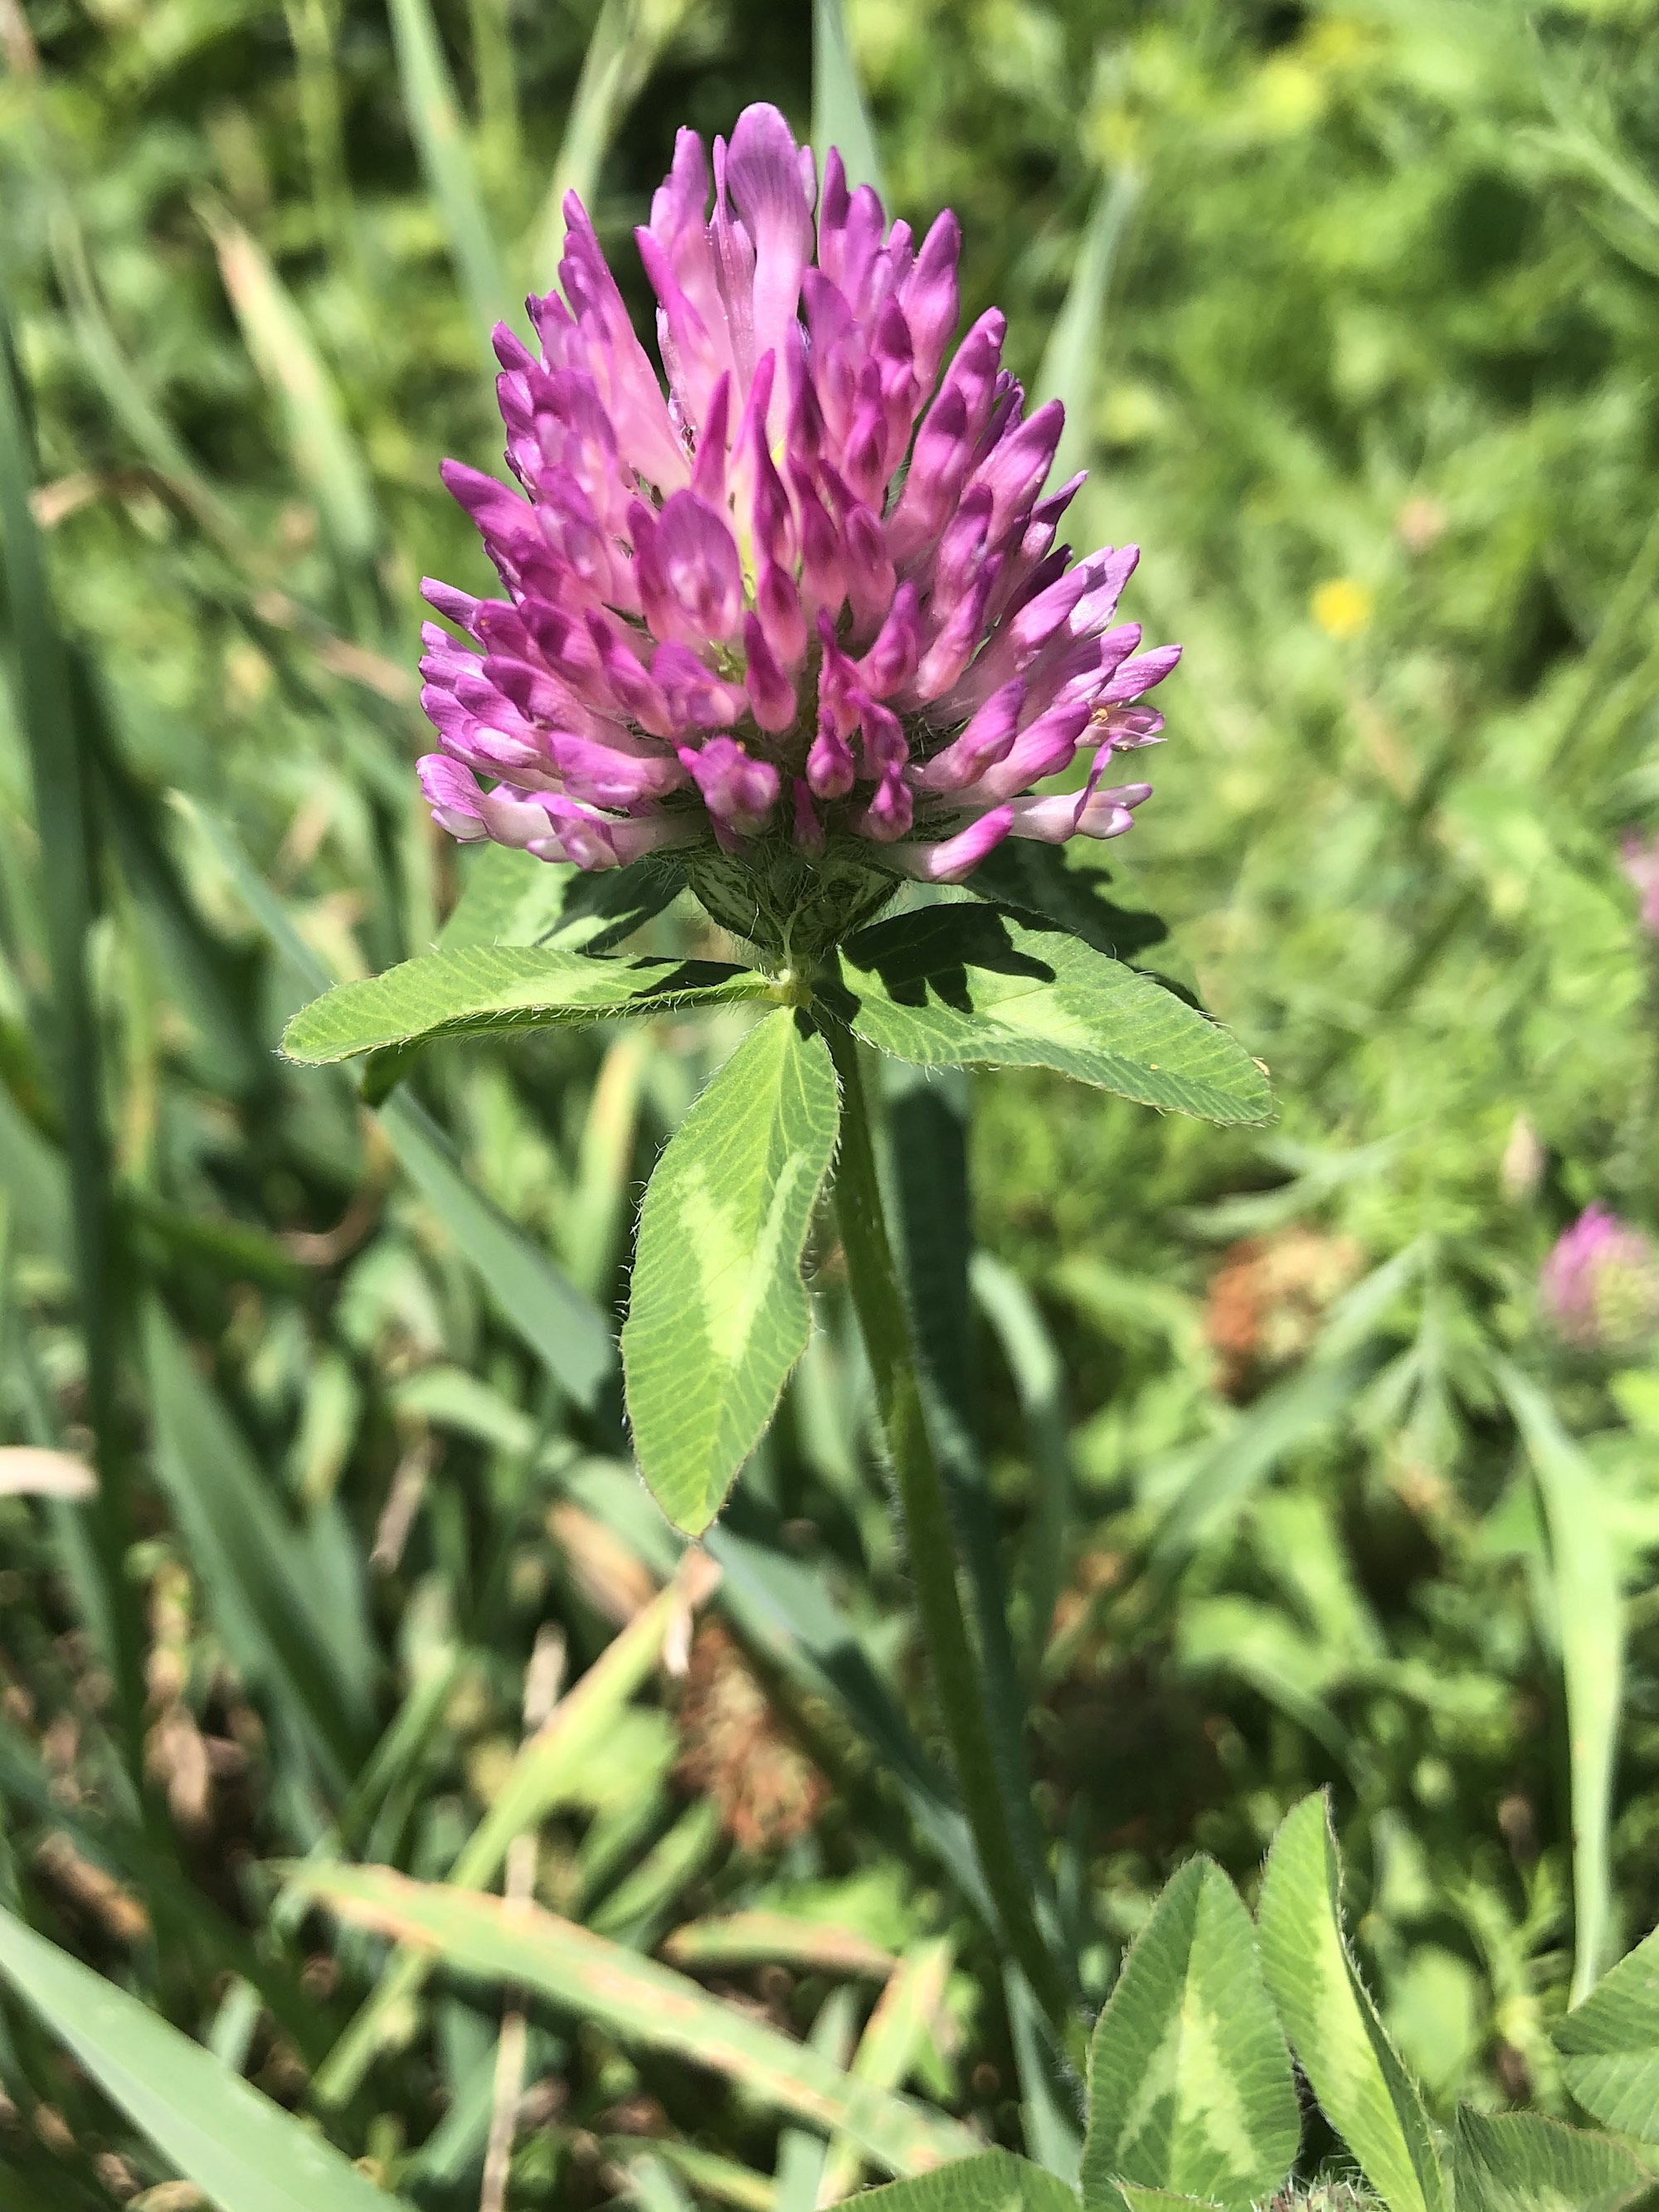 Red Clover on shore of Lake Wingra in Madison, Wisconsin on July 12, 2020.